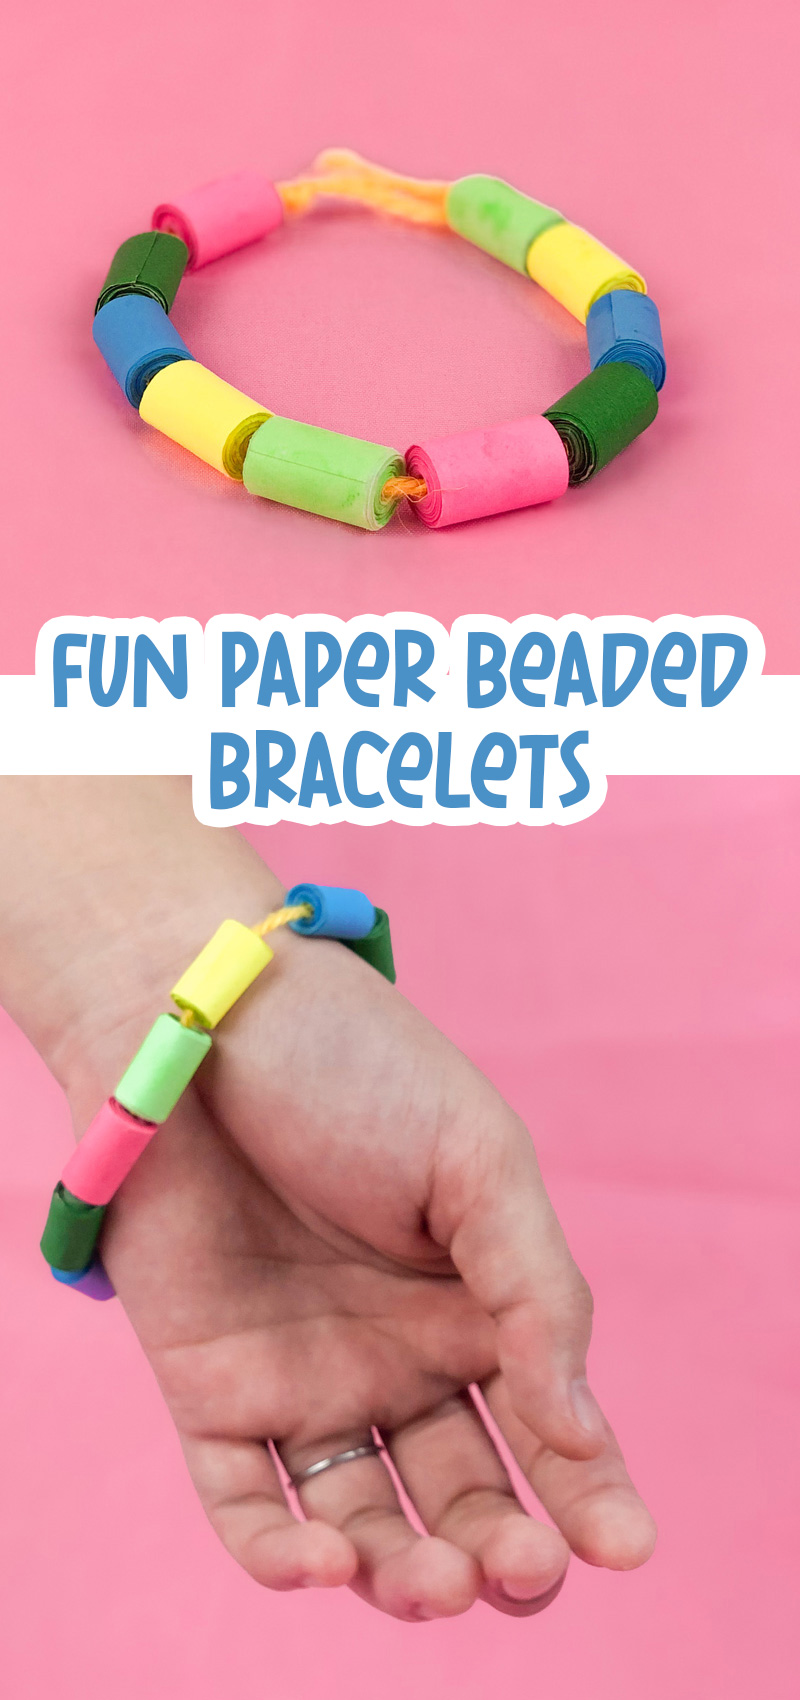 How to Make Beaded Friendship Bracelets - Crafty Little Gnome